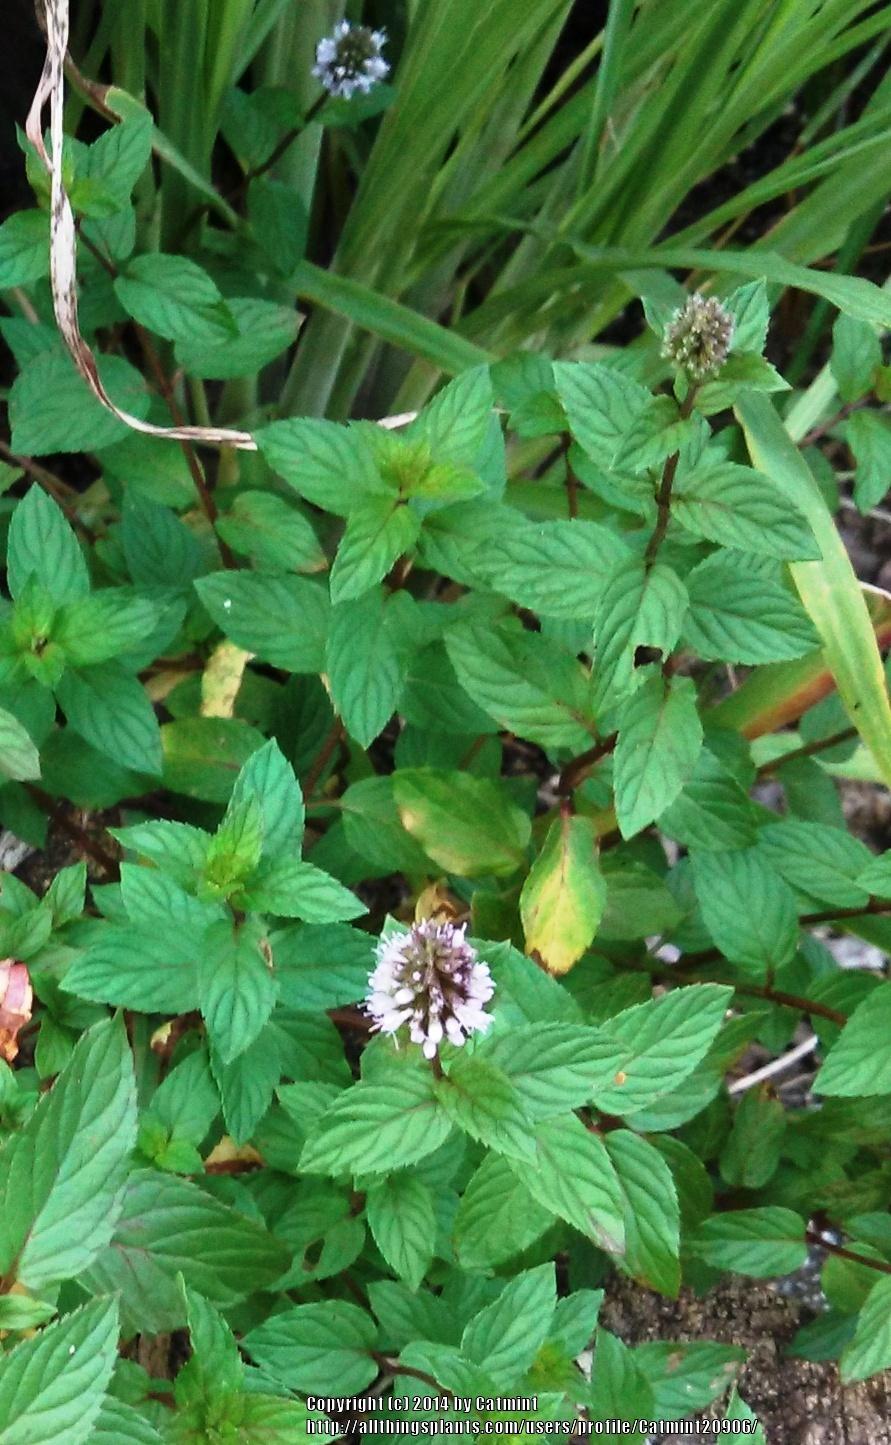 Photo of Chocolate Mint (Mentha x piperita 'Chocolate') uploaded by Catmint20906